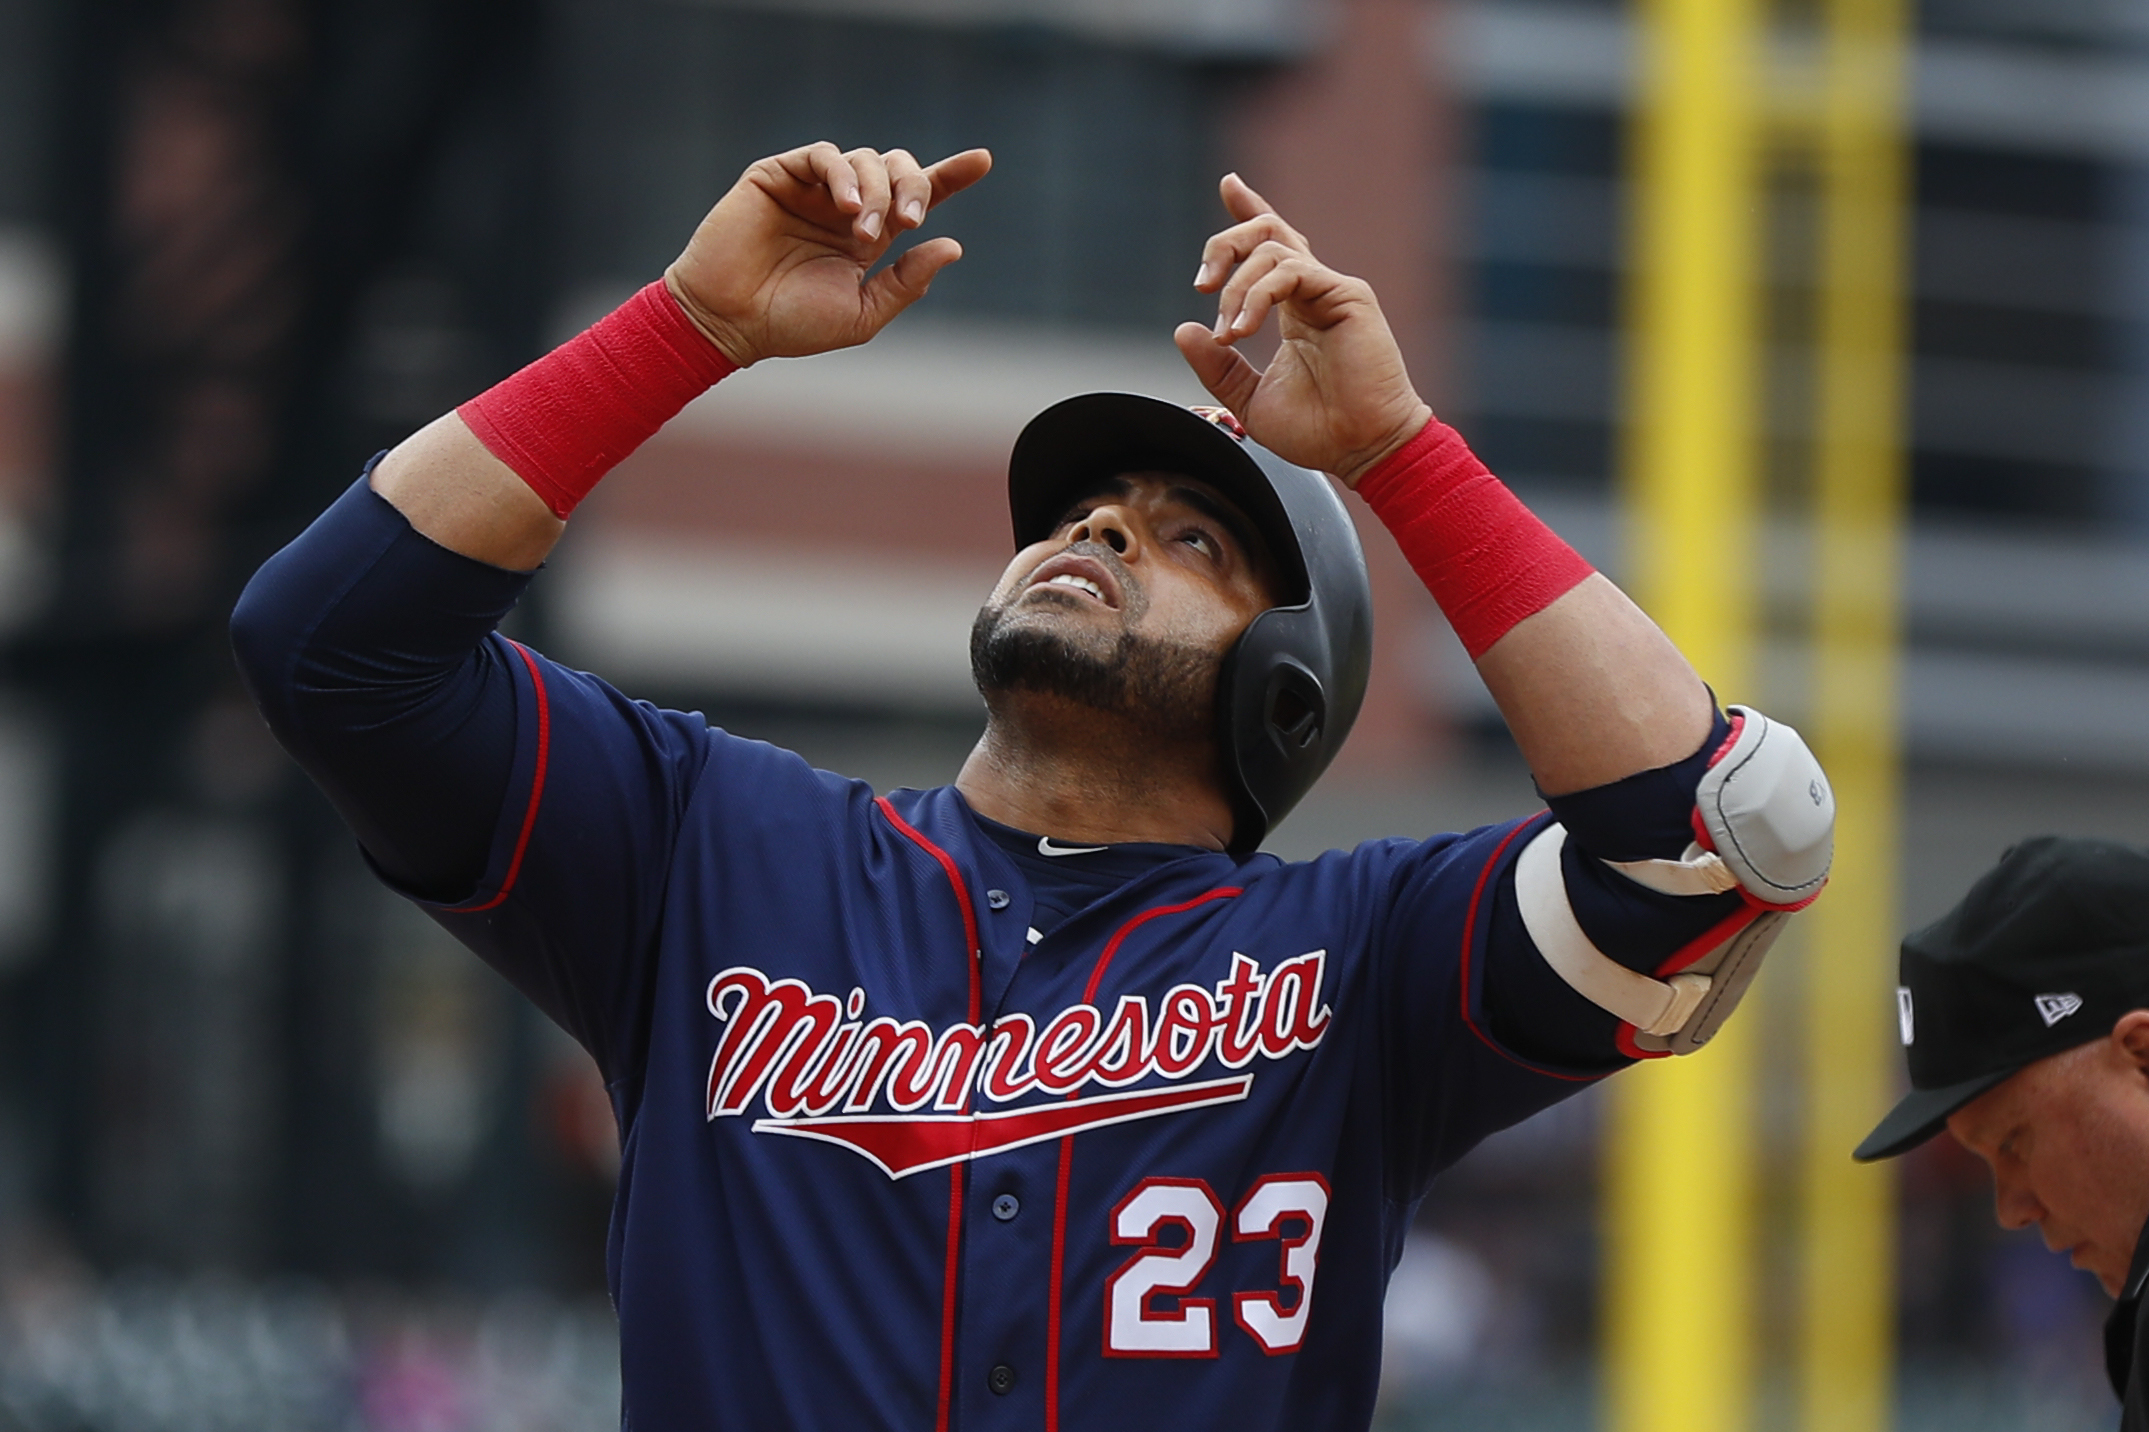 Cruz homers in 4th straight game, Twins trounce Tigers 12-2